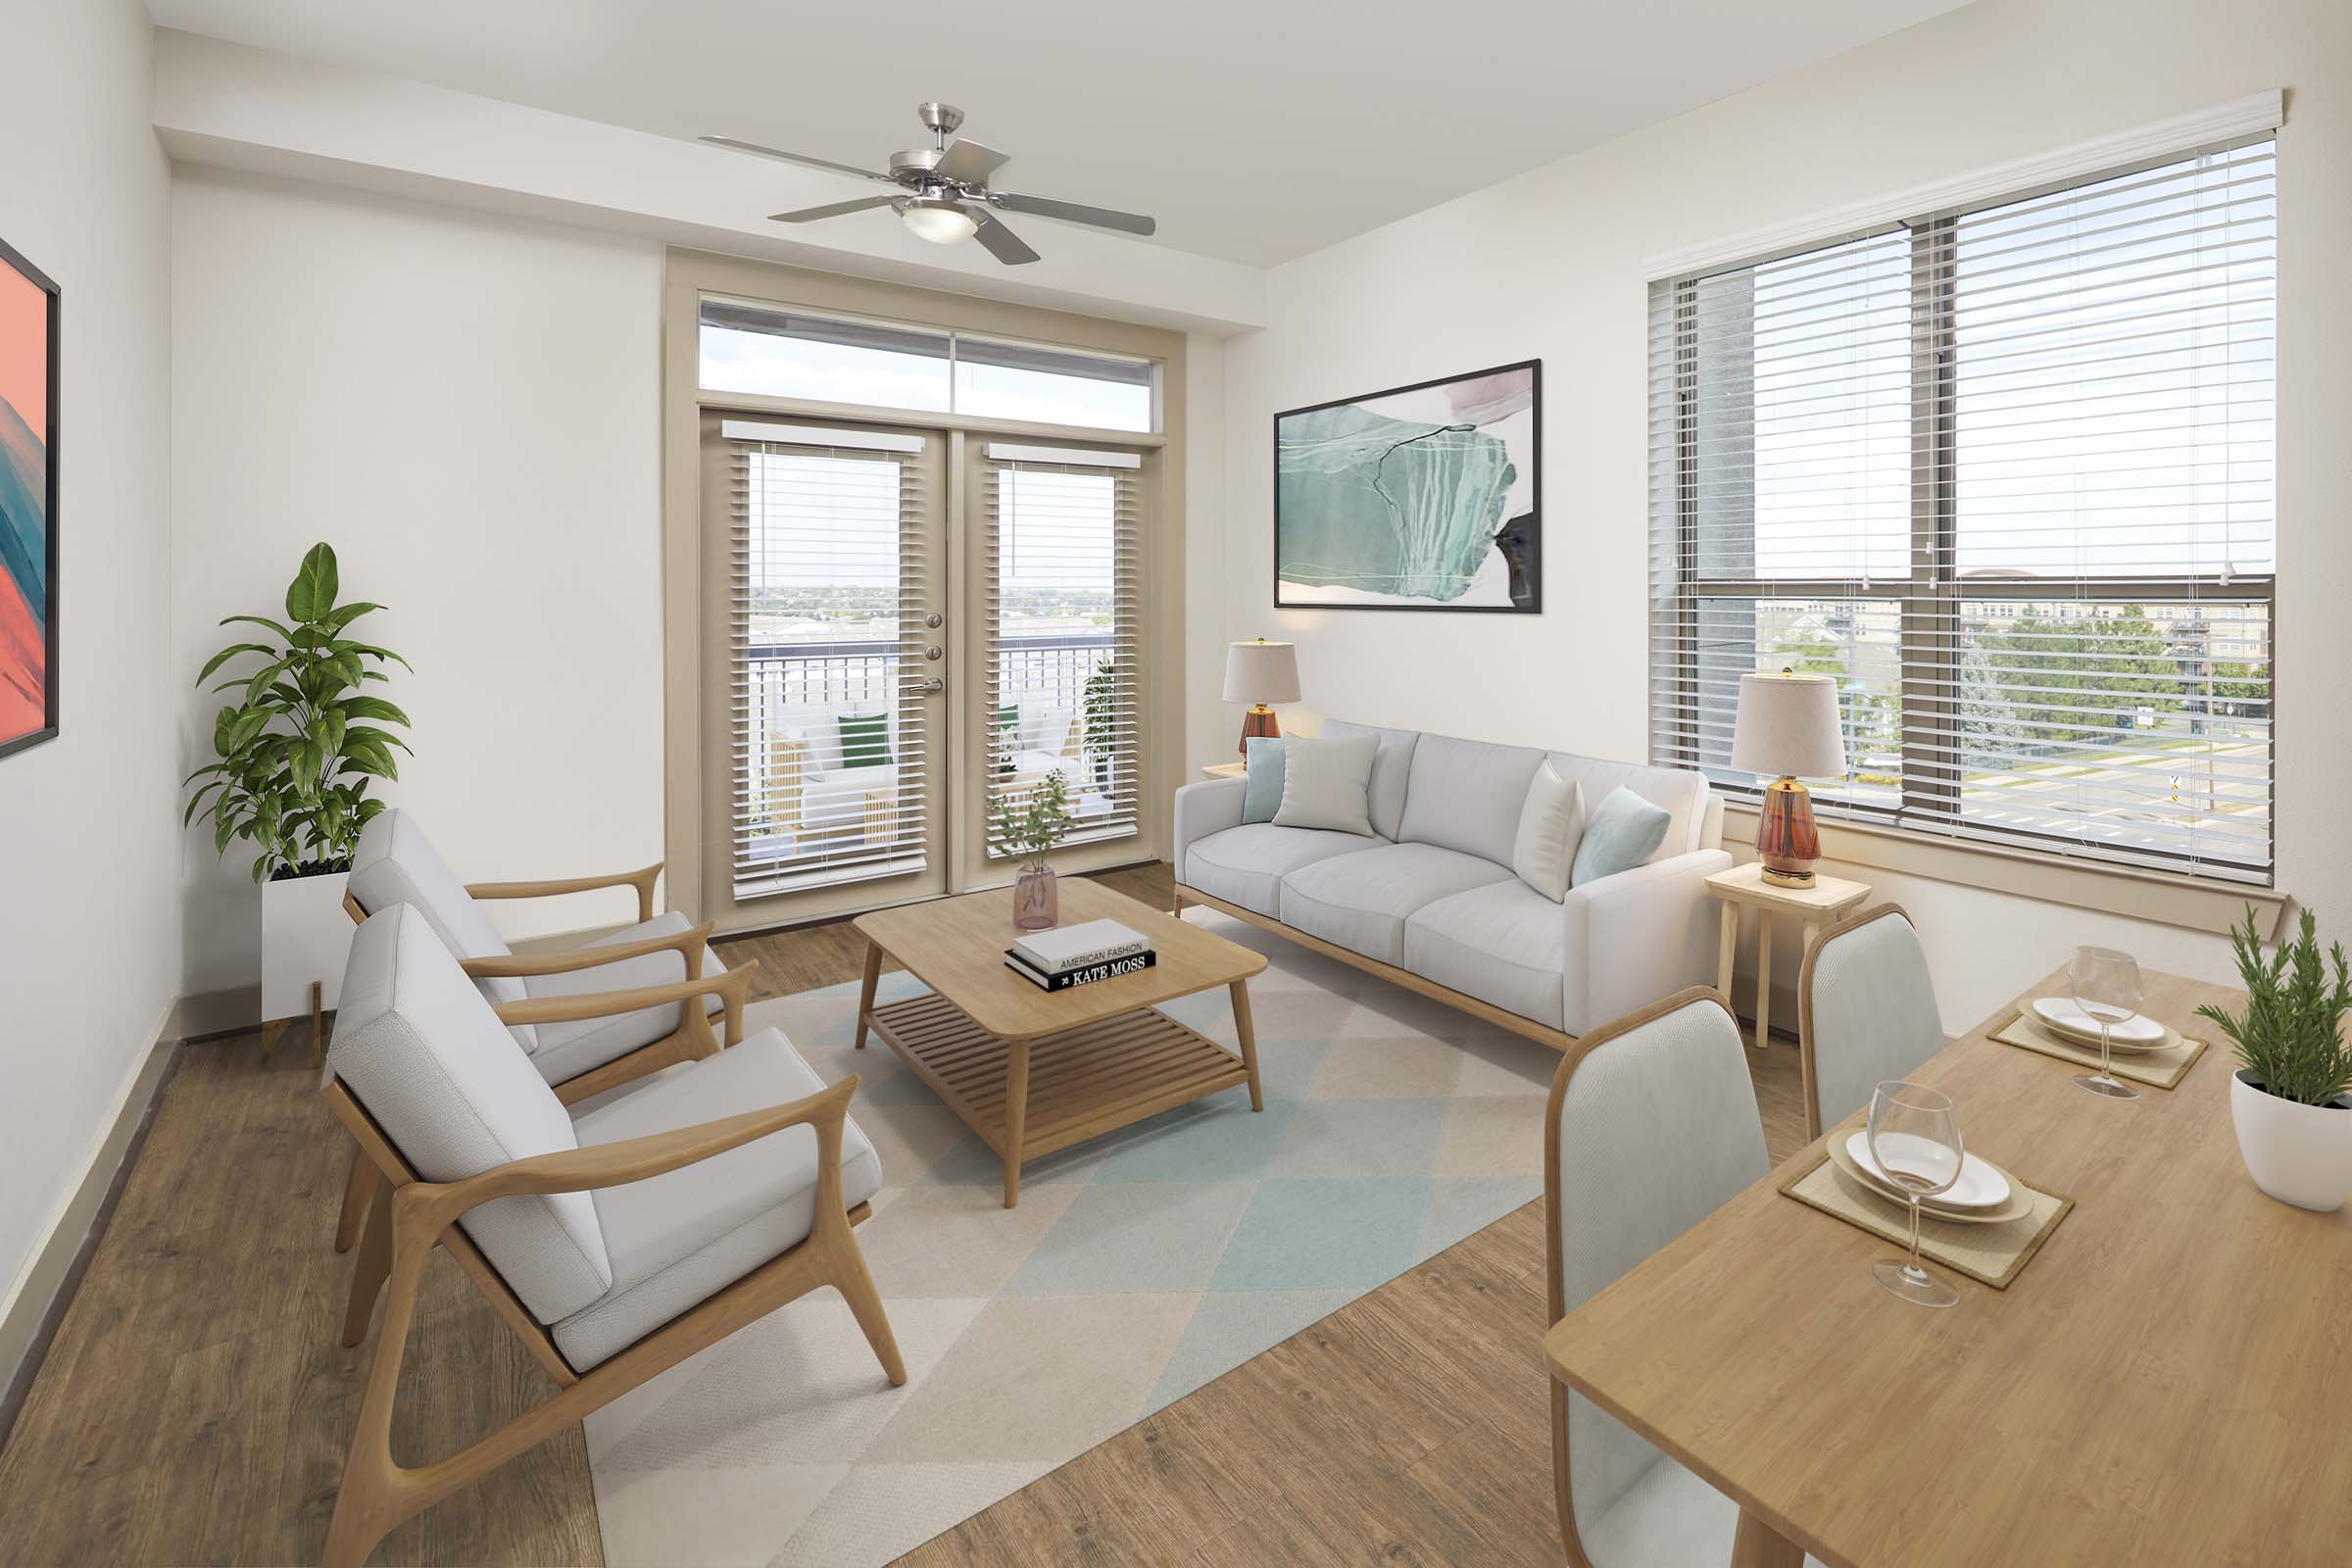 Living room with direct access to the balcony at Camden Lincoln Station Apartments in Lone Tree, CO